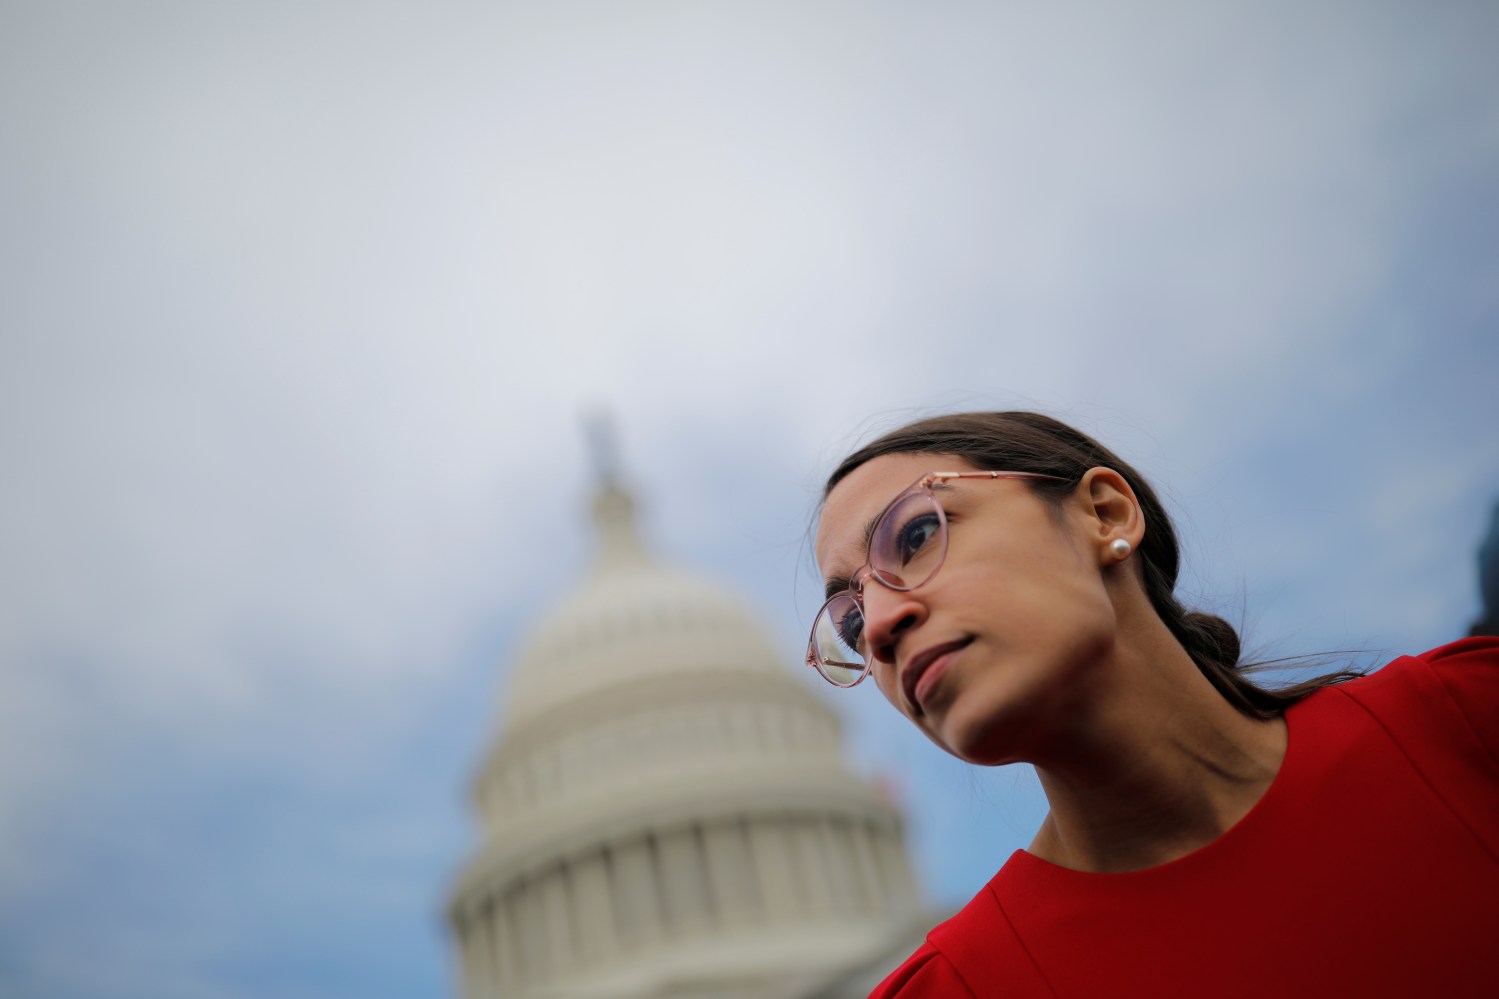 Democratic Representative-elect Alexandria Ocasio-Cortez of New York (L) arrives for a class photo with incoming newly elected members of the U.S. House of Representatives on Capitol Hill in Washington, U.S., November 14, 2018. REUTERS/Carlos Barria - RC124C44C420